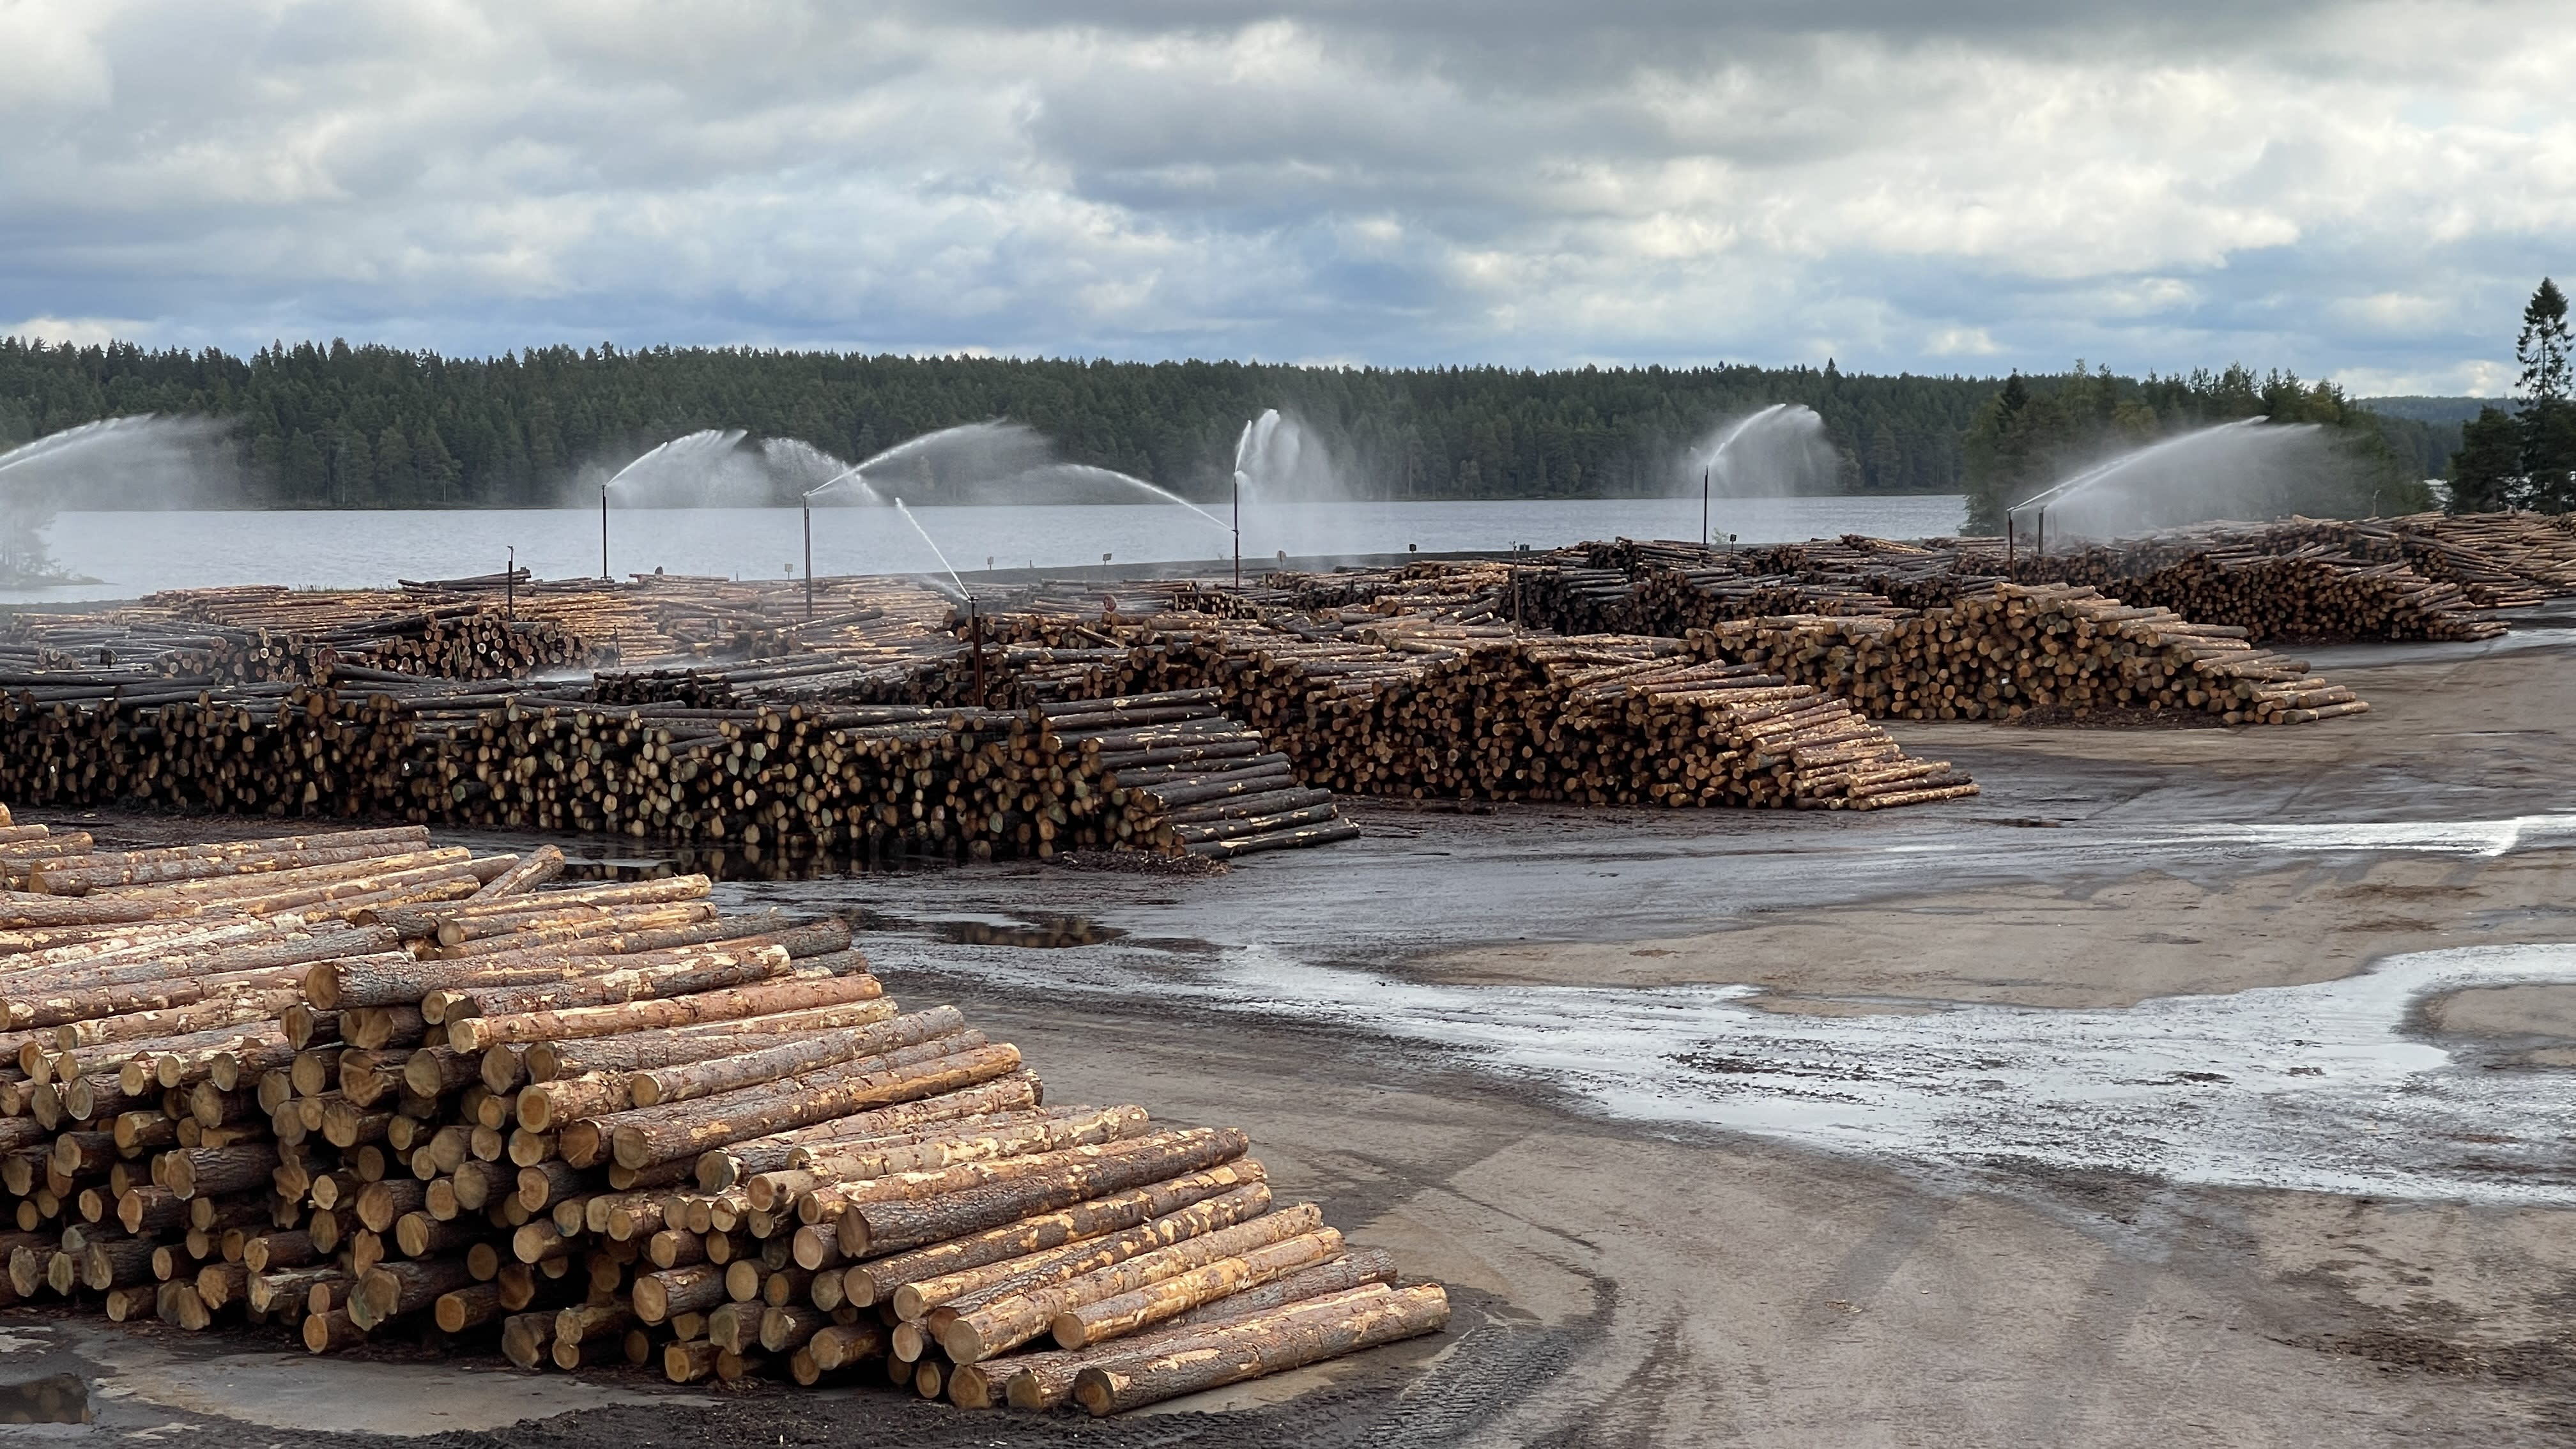 A shortage of wood forces a change in the Finnish wood industry